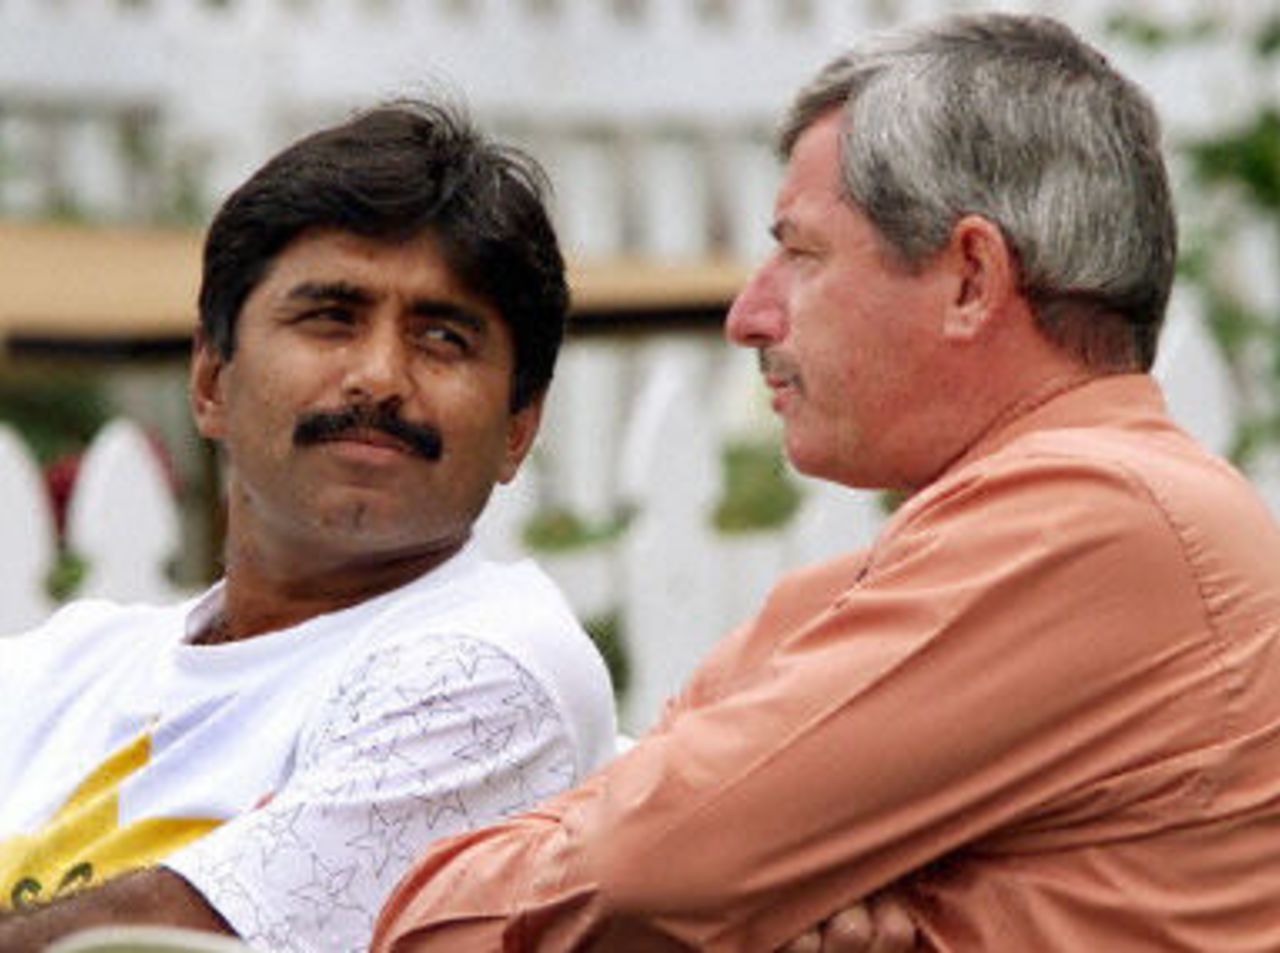 Two legends of the cricketing world, Pakistan coach Javed Miandad and New Zealand selector Sir Richard Hadlee chat, day 1, 3rd Test at Hamilton, 27-31 March 2001.